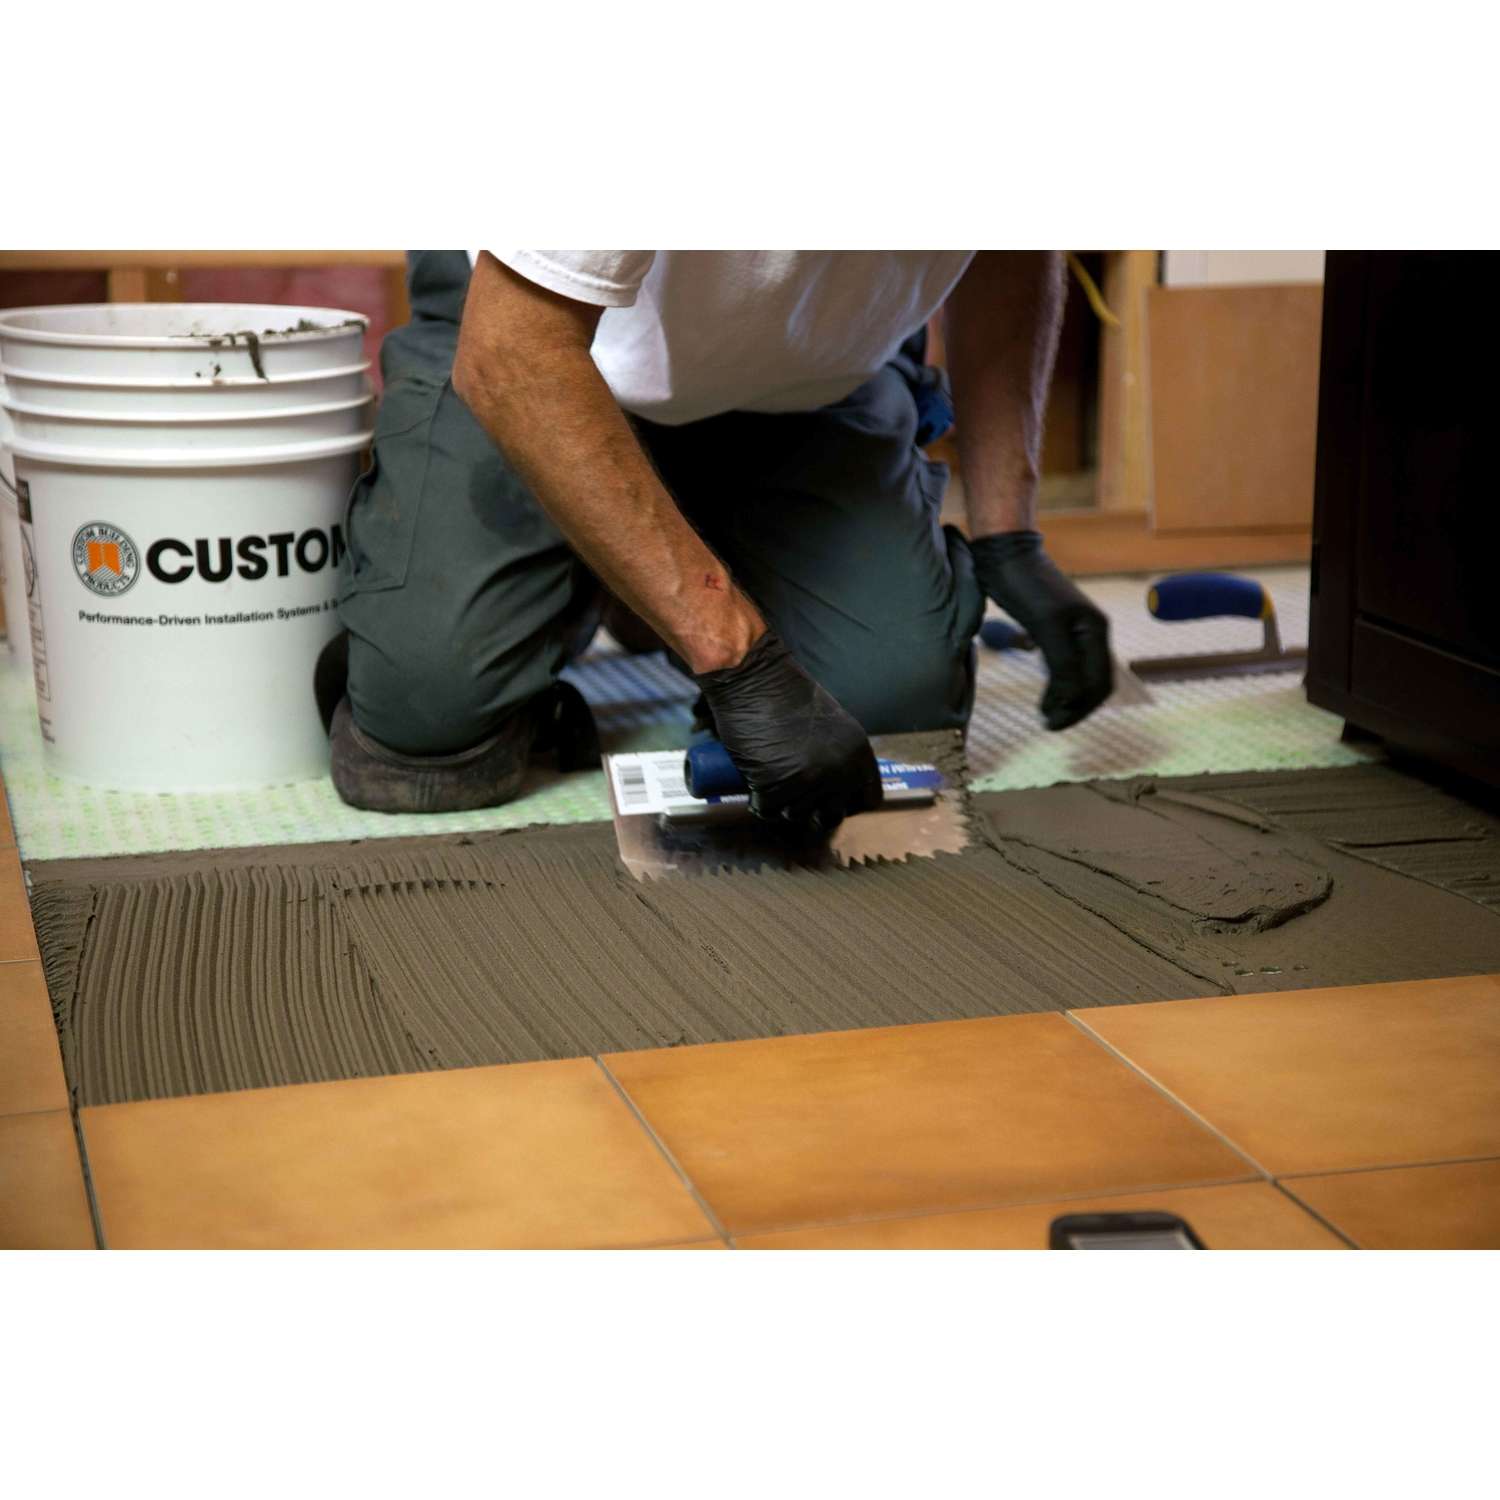 Tile and Flooring Installation Systems - CUSTOM Building Products